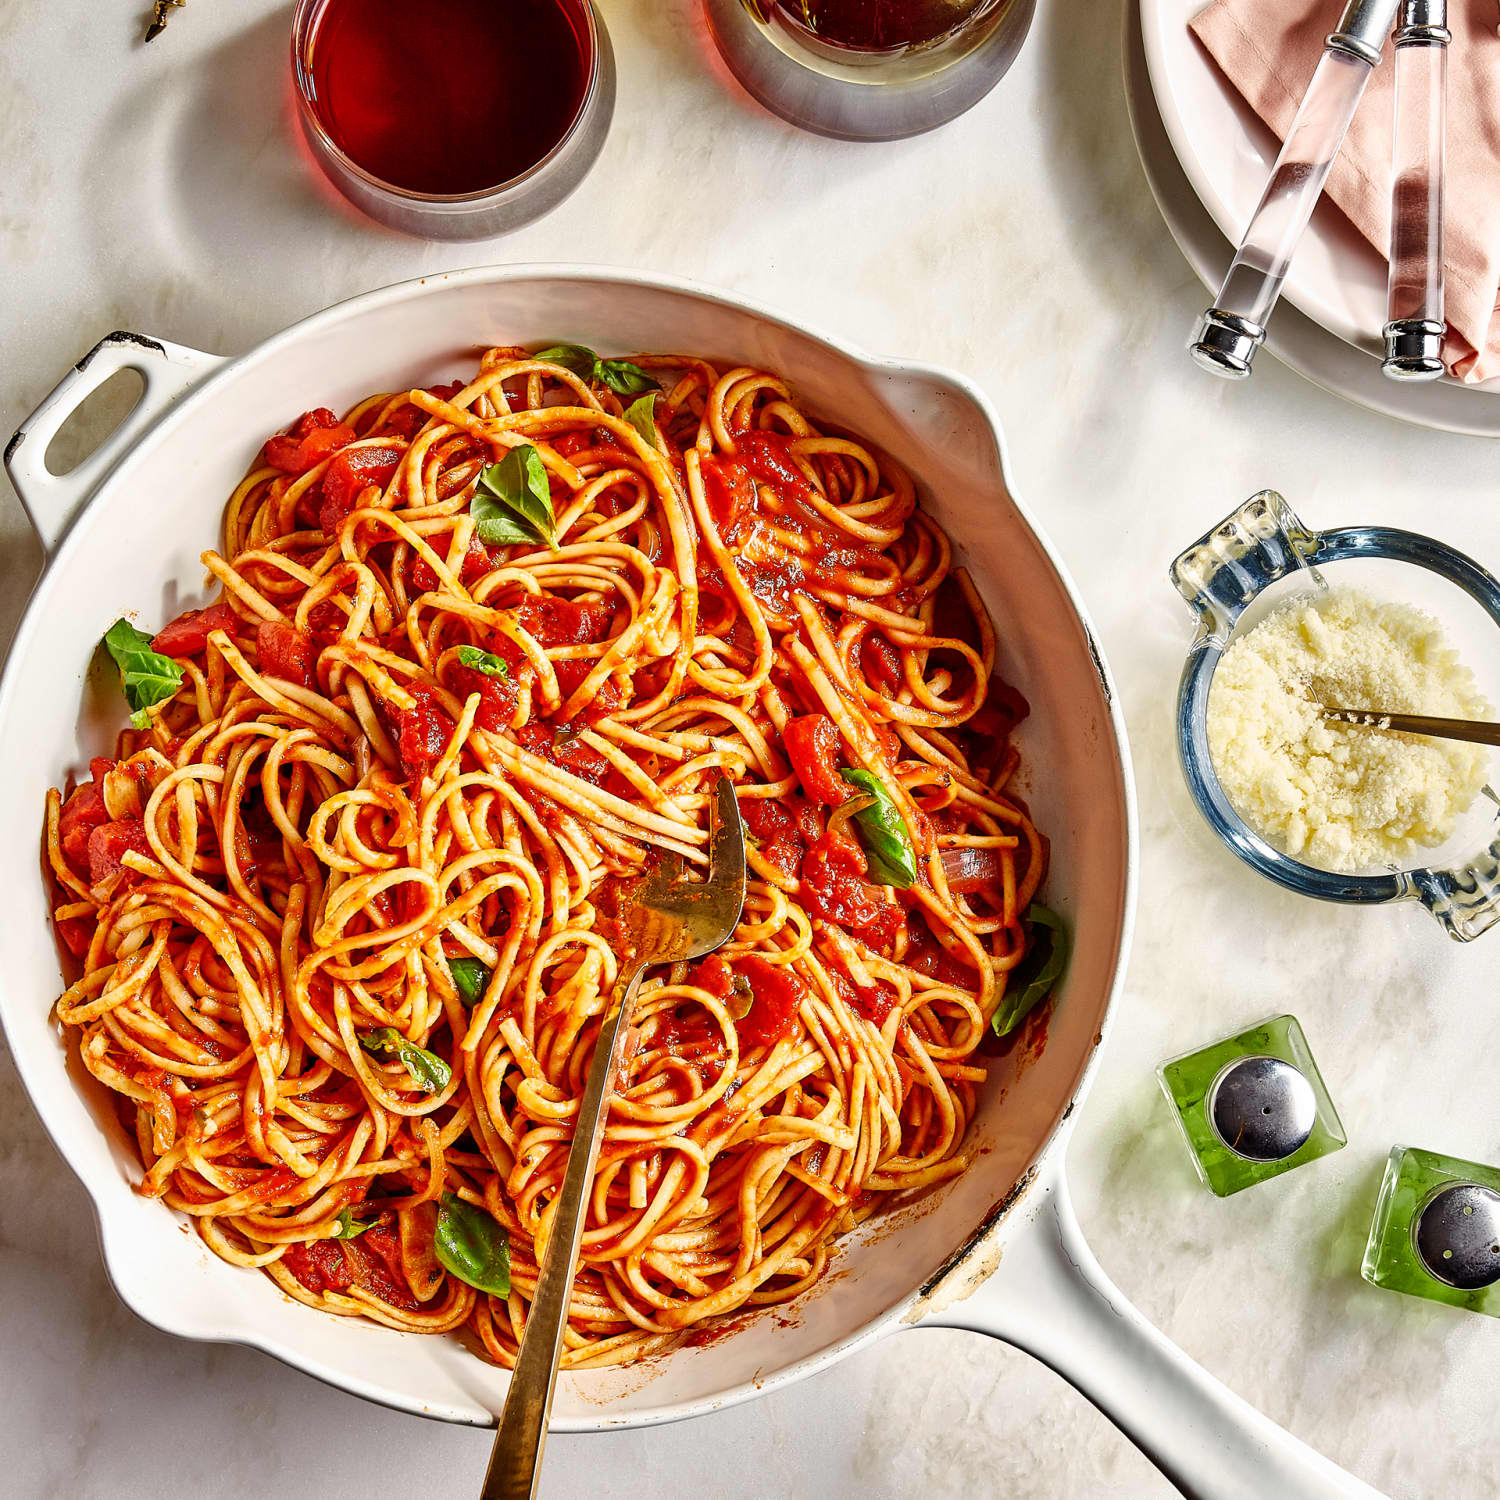 Joy of Cooking's One-Pan Pasta with Tomatoes and Herbs